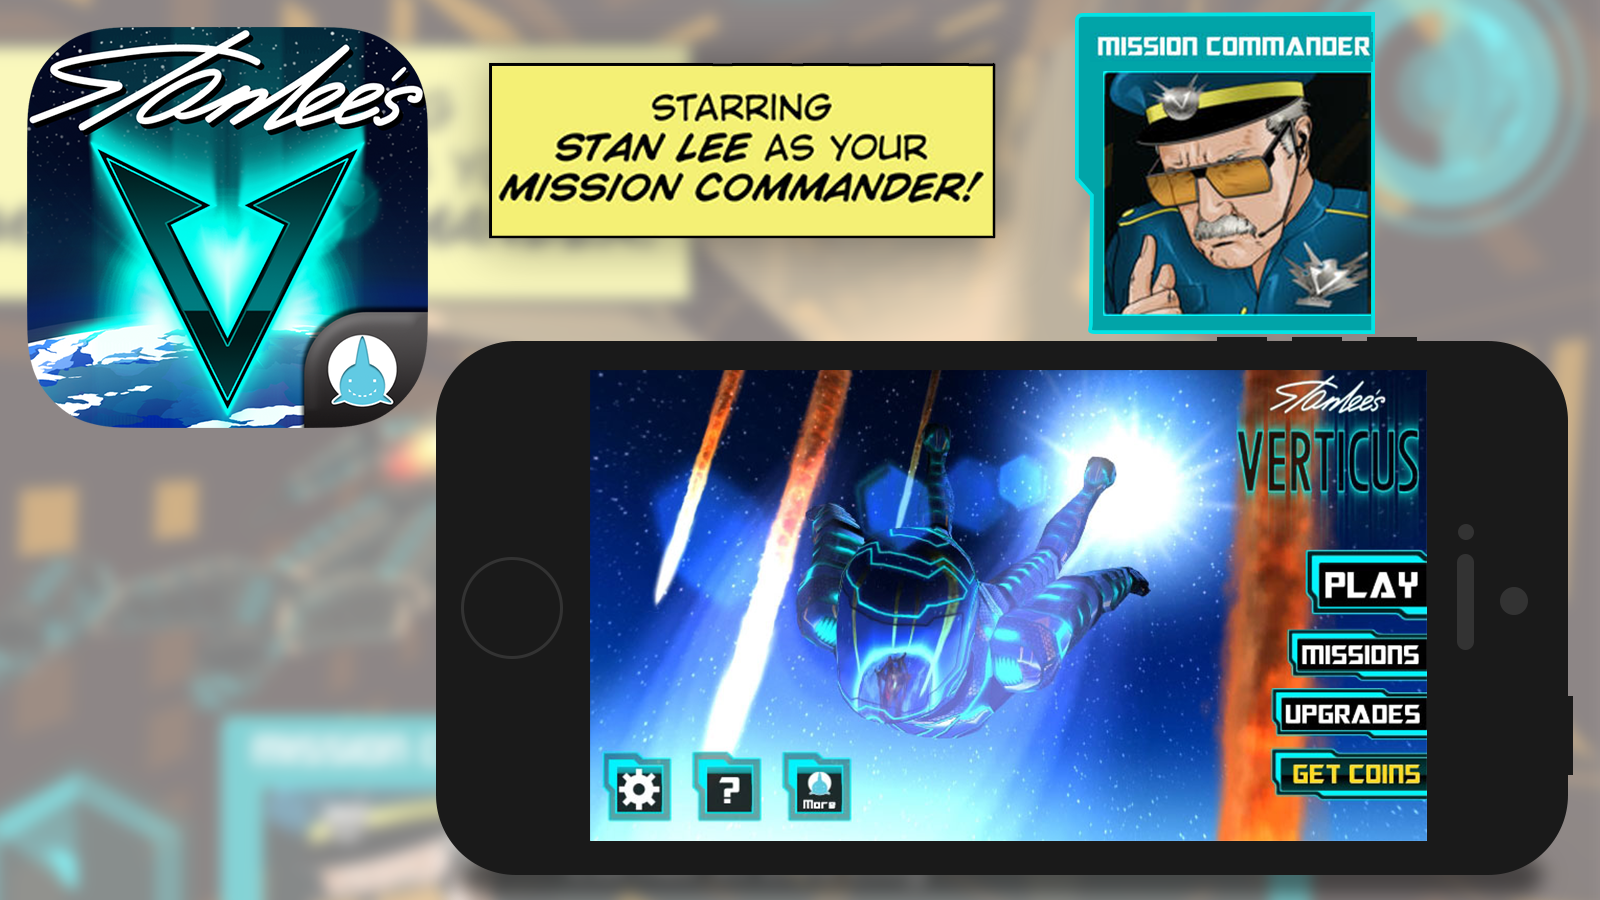 App Icon and Comic Illustration of Stan Lee as 'Mission Commander', the in-game narrator.